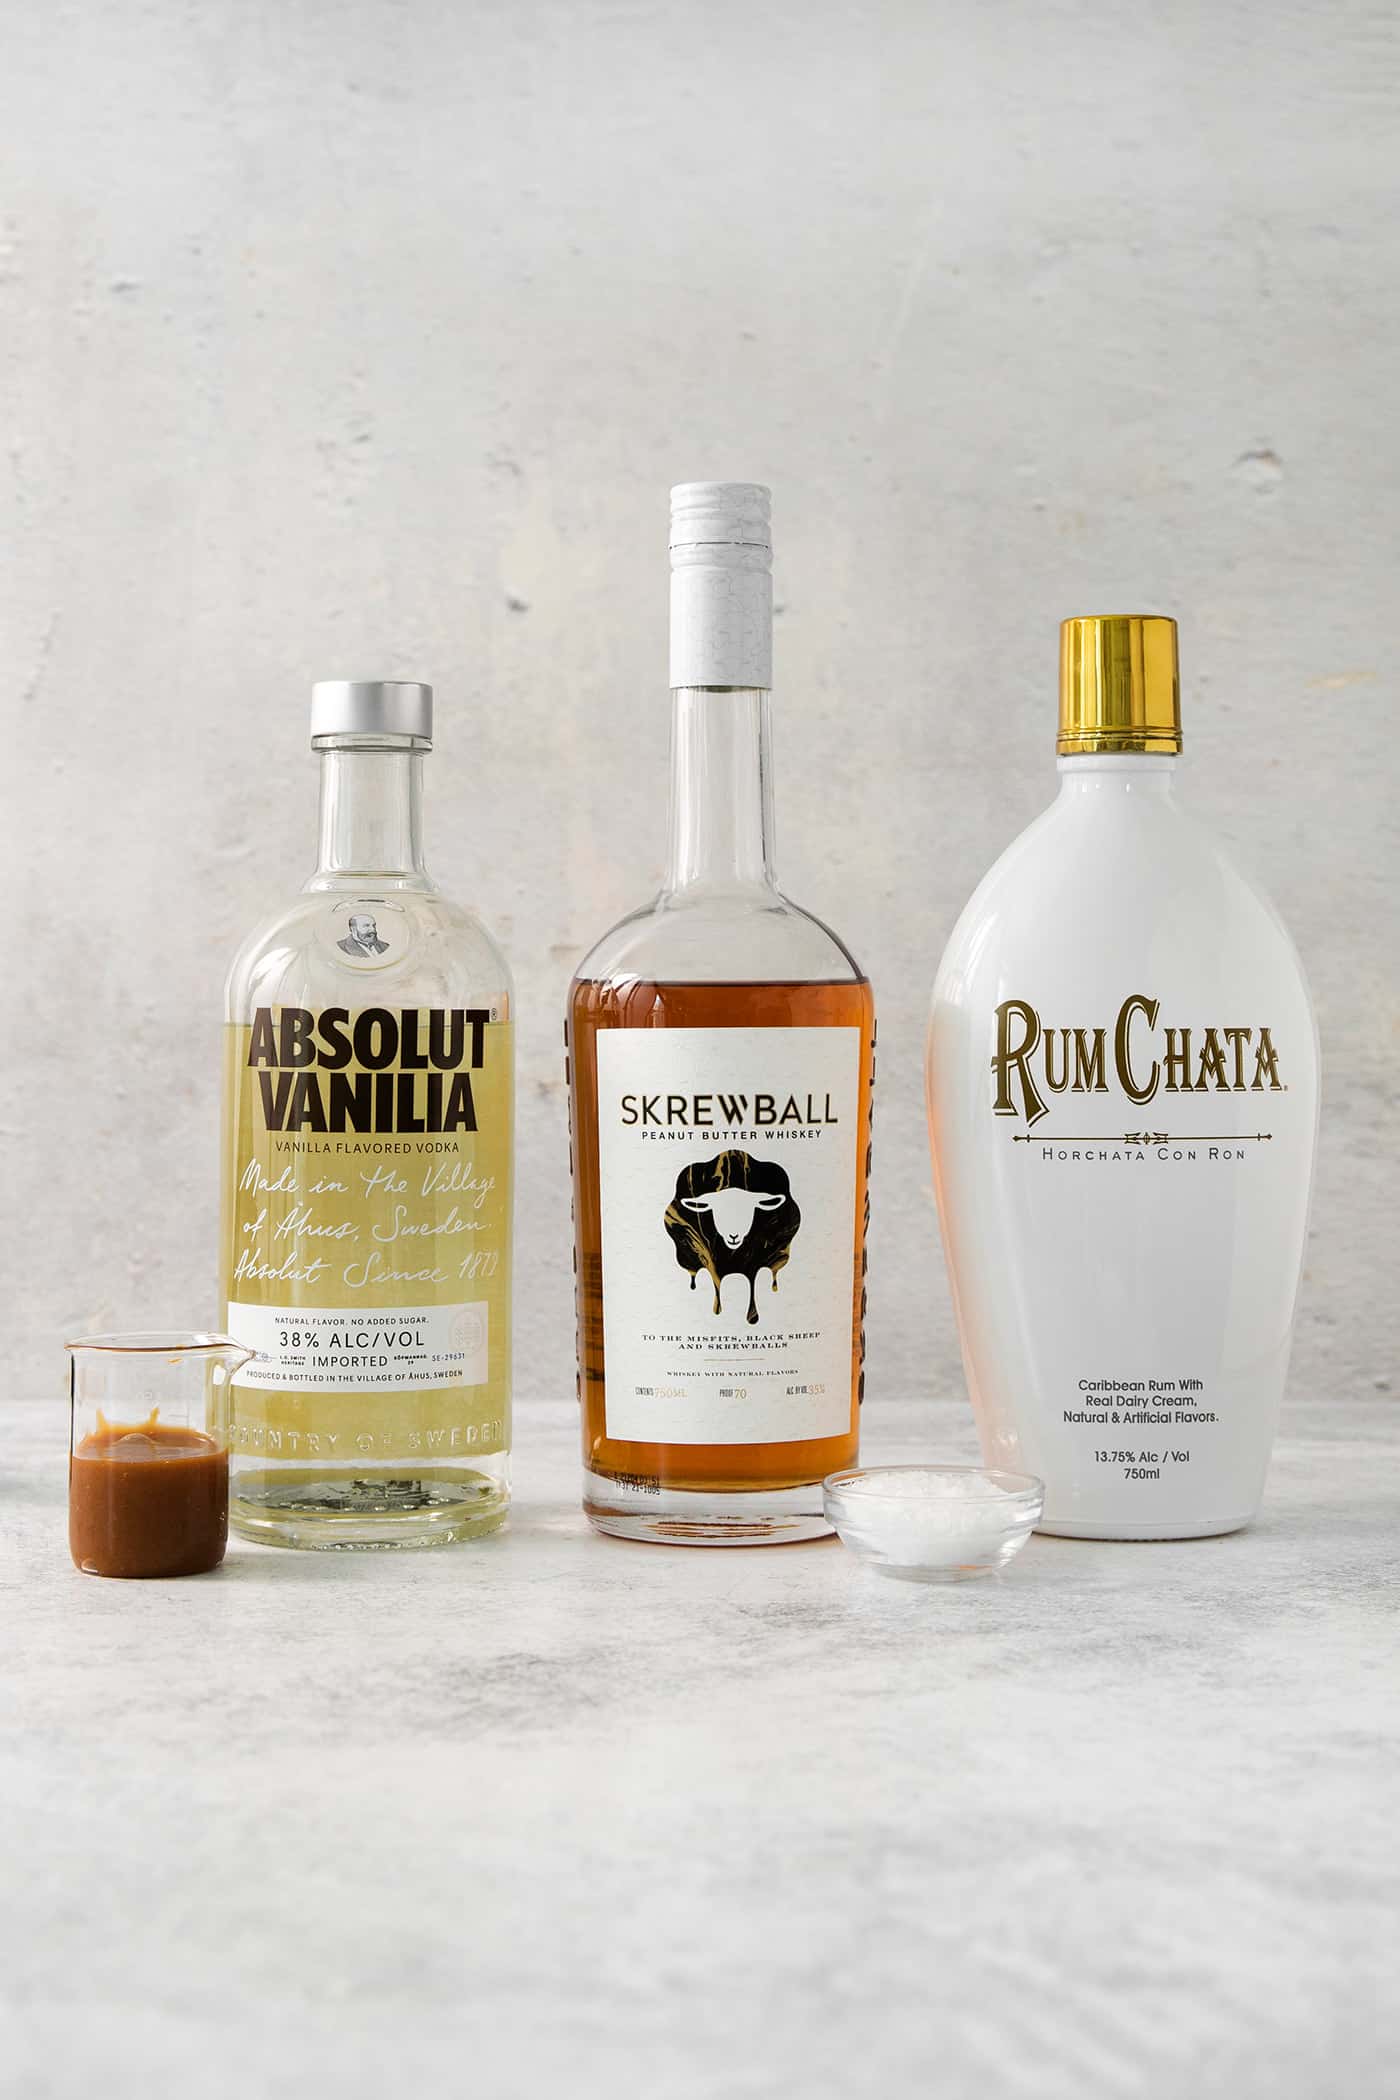 Ingredients for salted nut roll shots are shown: rumchata, peanut butter vodka, and caramel sauce.